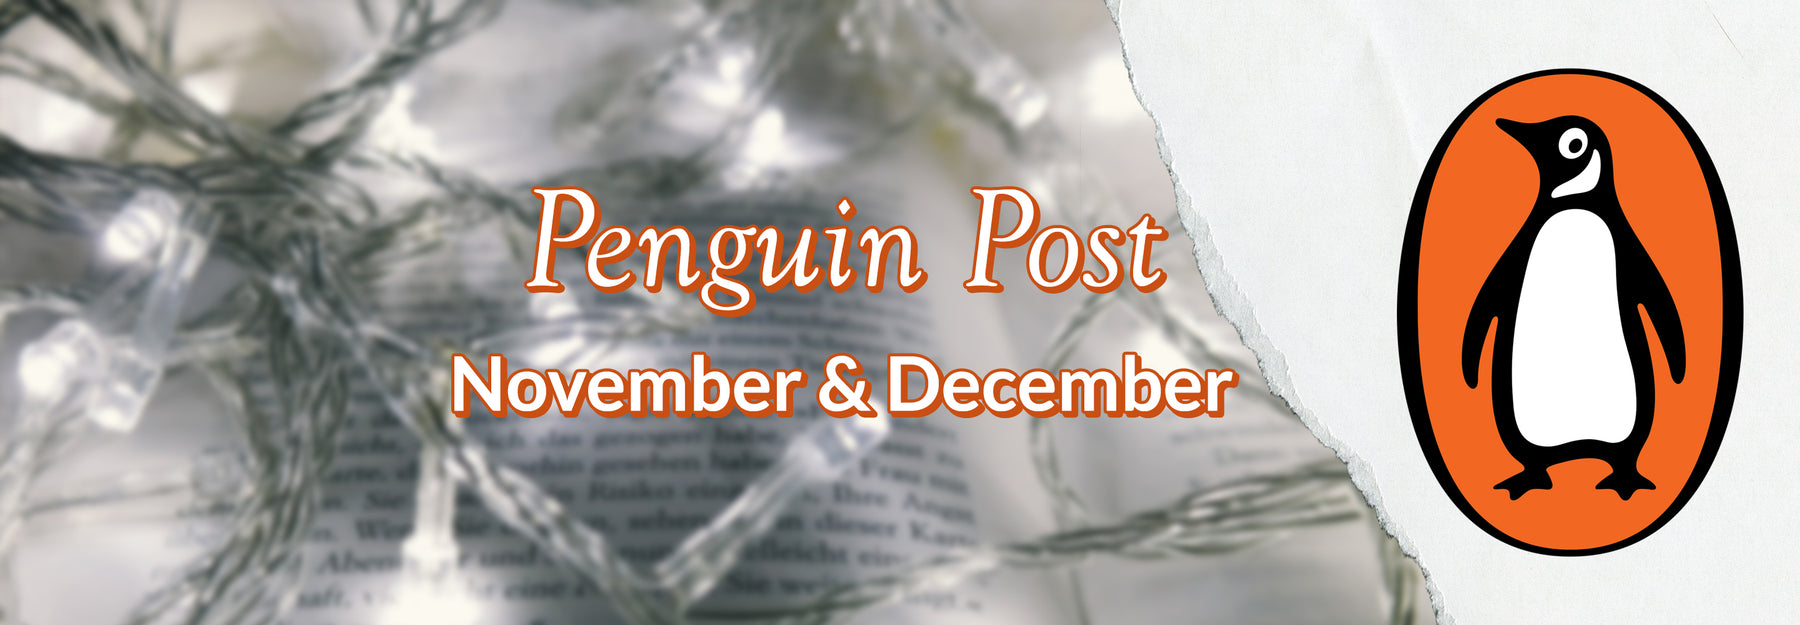 Wordsworth Special Edition of the Penguin Post for November & December